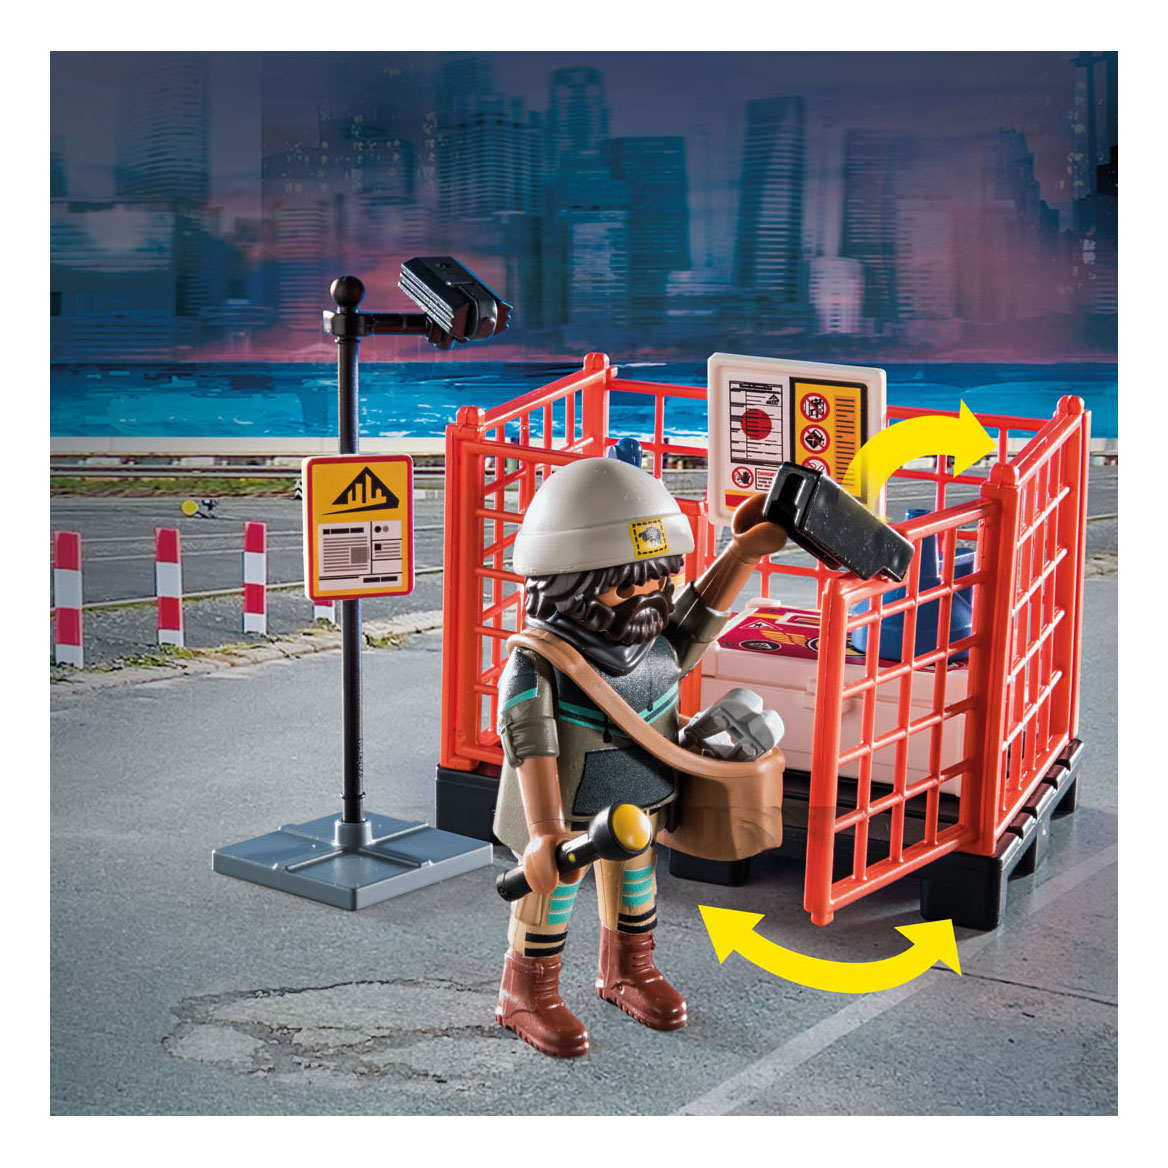 Playmobil City Action Starter Pack Police - 71381